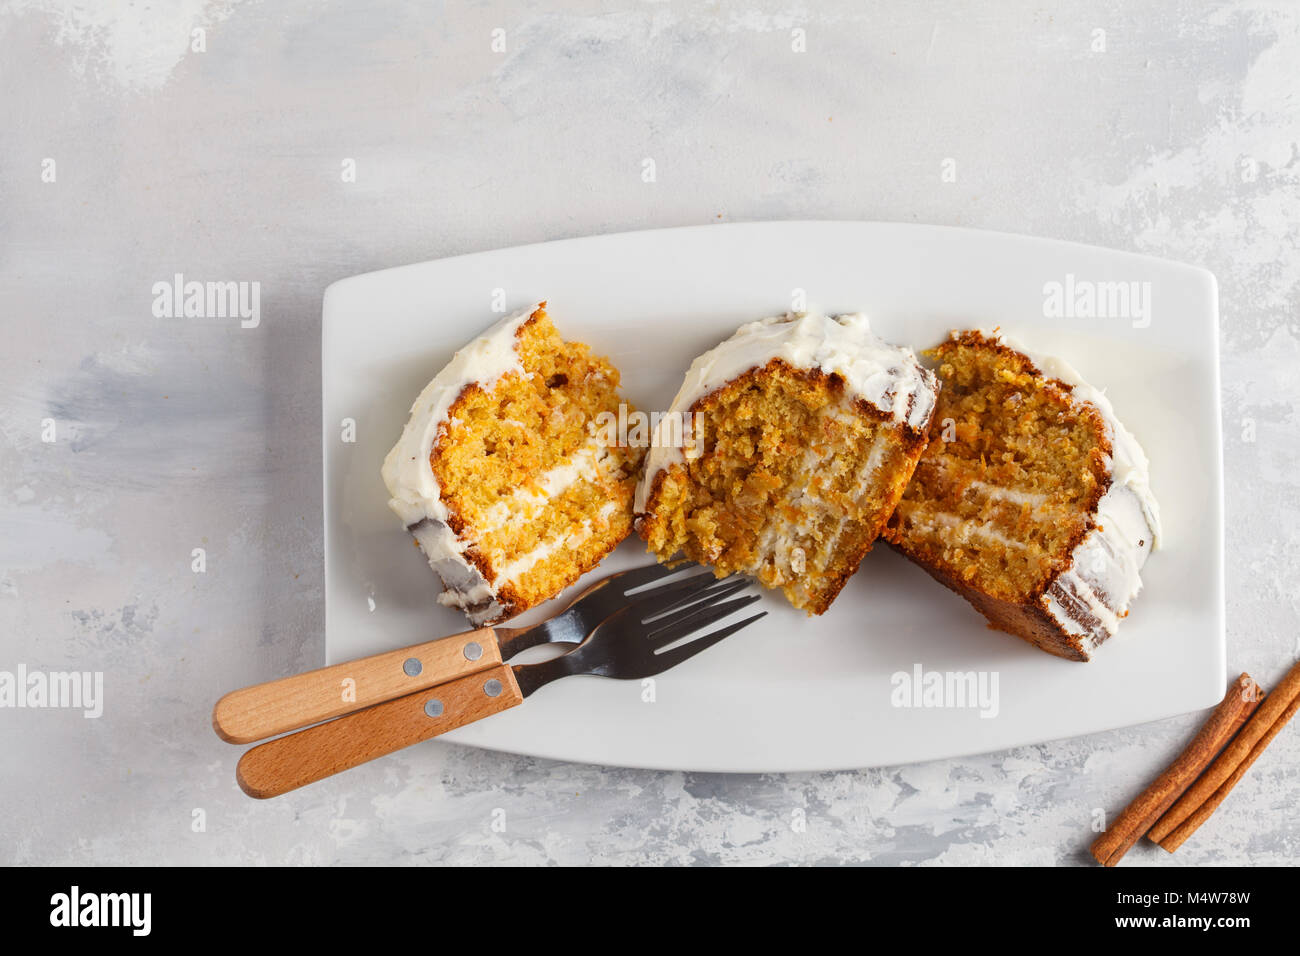 Pieces of homemade carrot cake with white cream on white dish. Festive dessert concept. Stock Photo